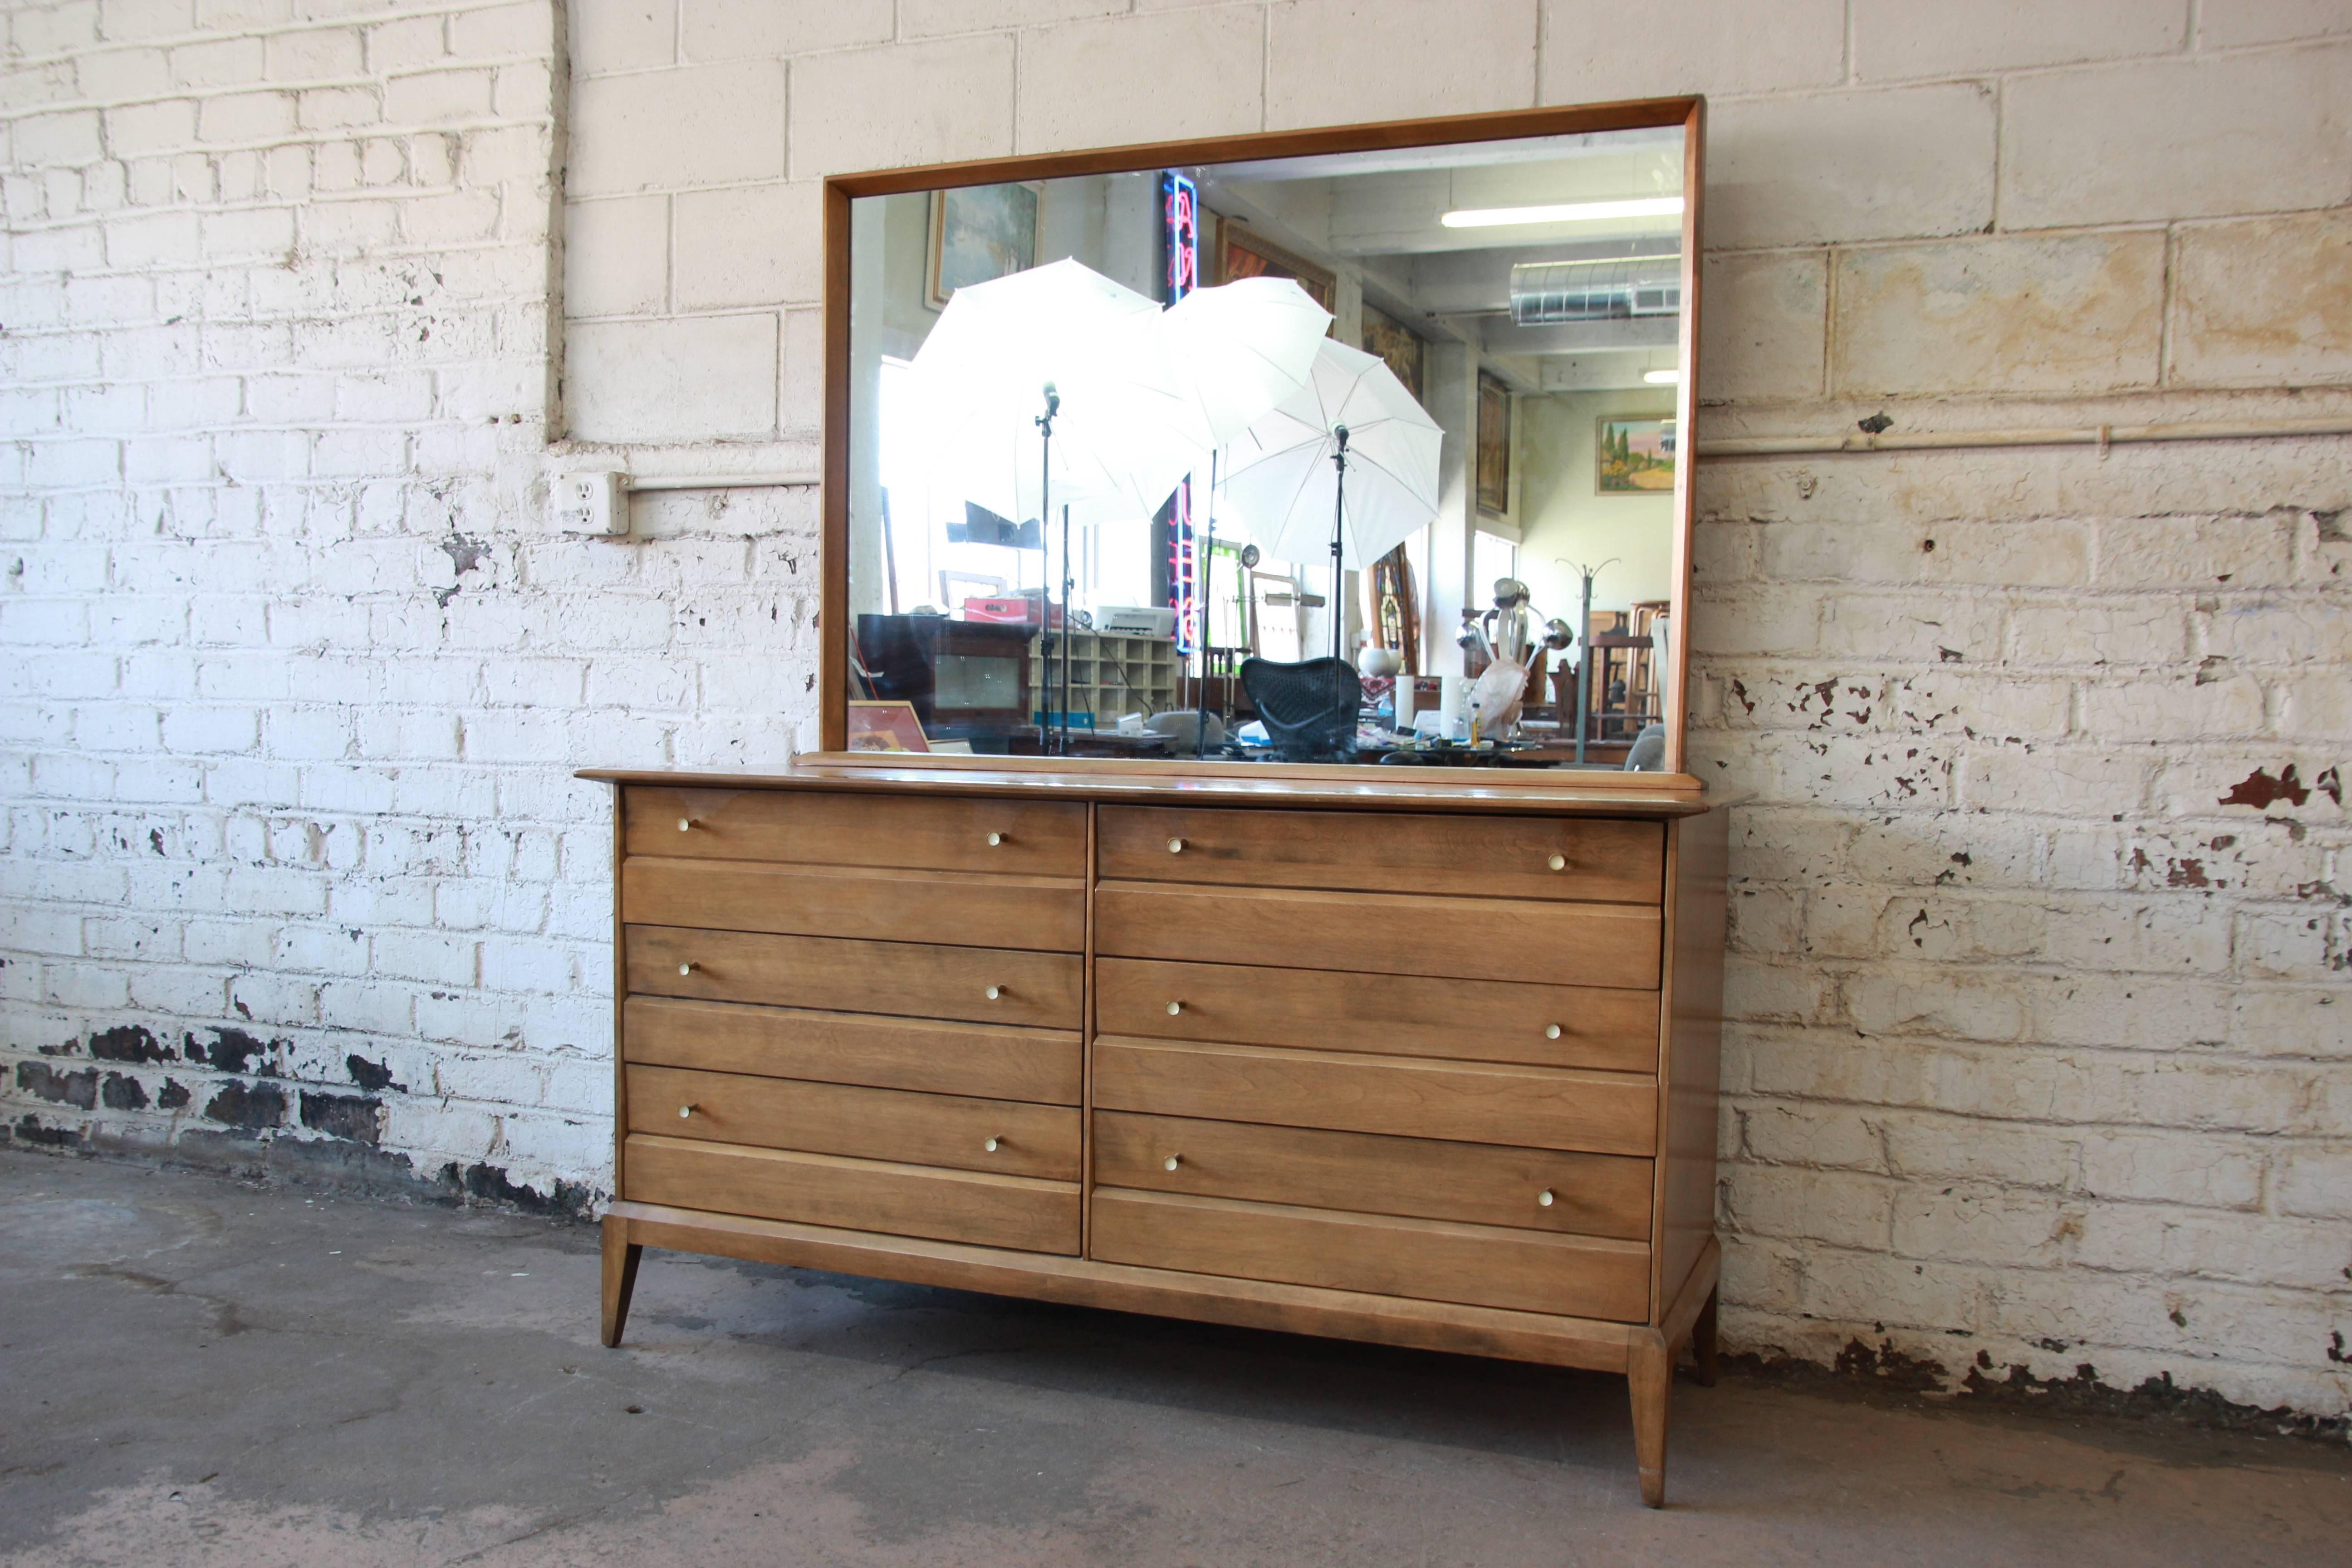 A beautiful vintage six-drawer Mid-Century Modern dresser with mirror from the Cadence line by Heywood Wakefield. The dresser features clean, sleek Mid-Century design and solid maple construction in the 